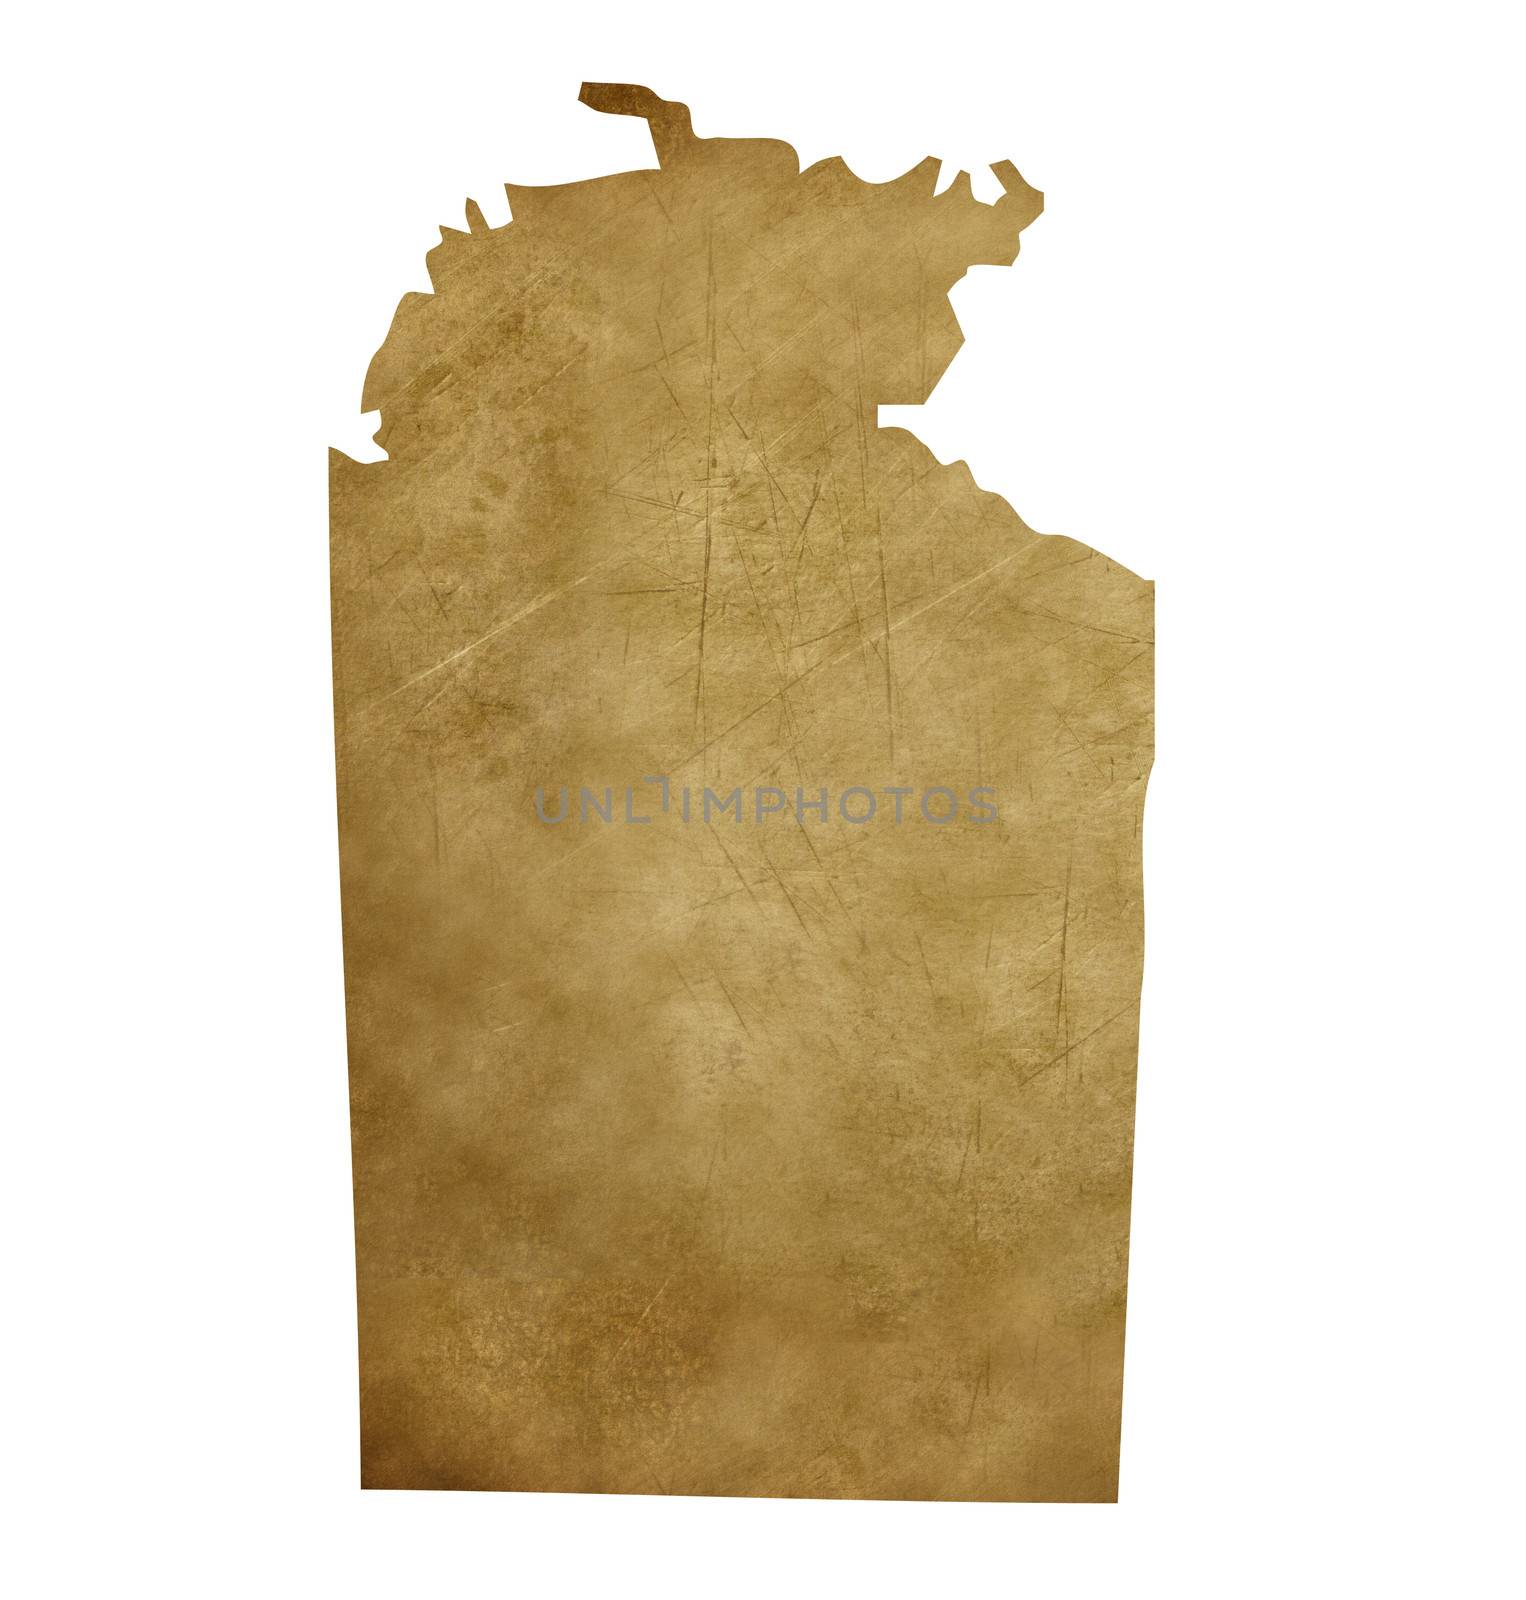 Grunge Australia Northern Territory map in treasure style isolated on white background.